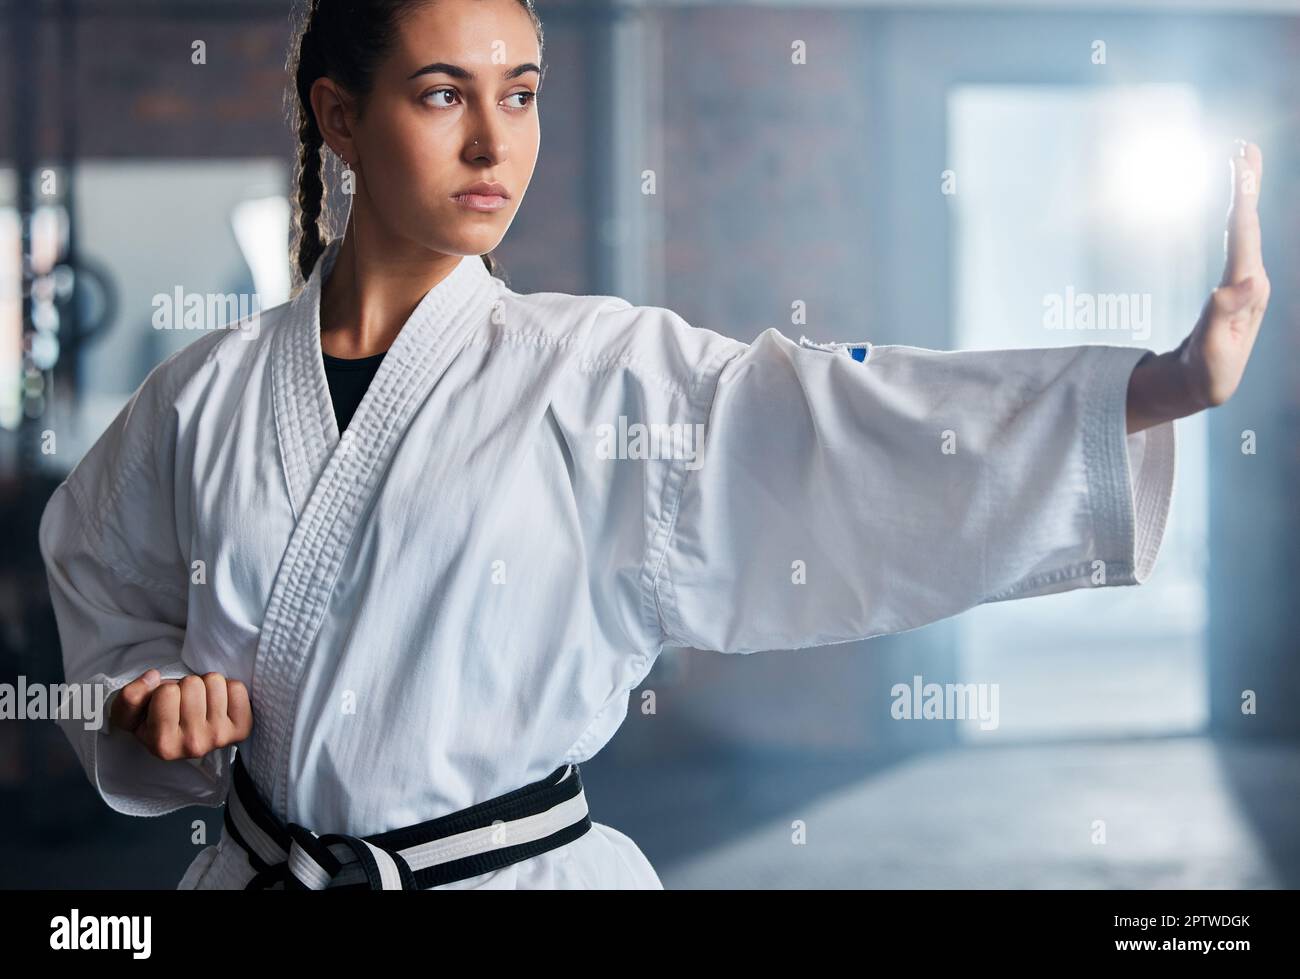 Karate Fitness And Sport With Woman Workout And Training For Fight Fitness And Exercise In 